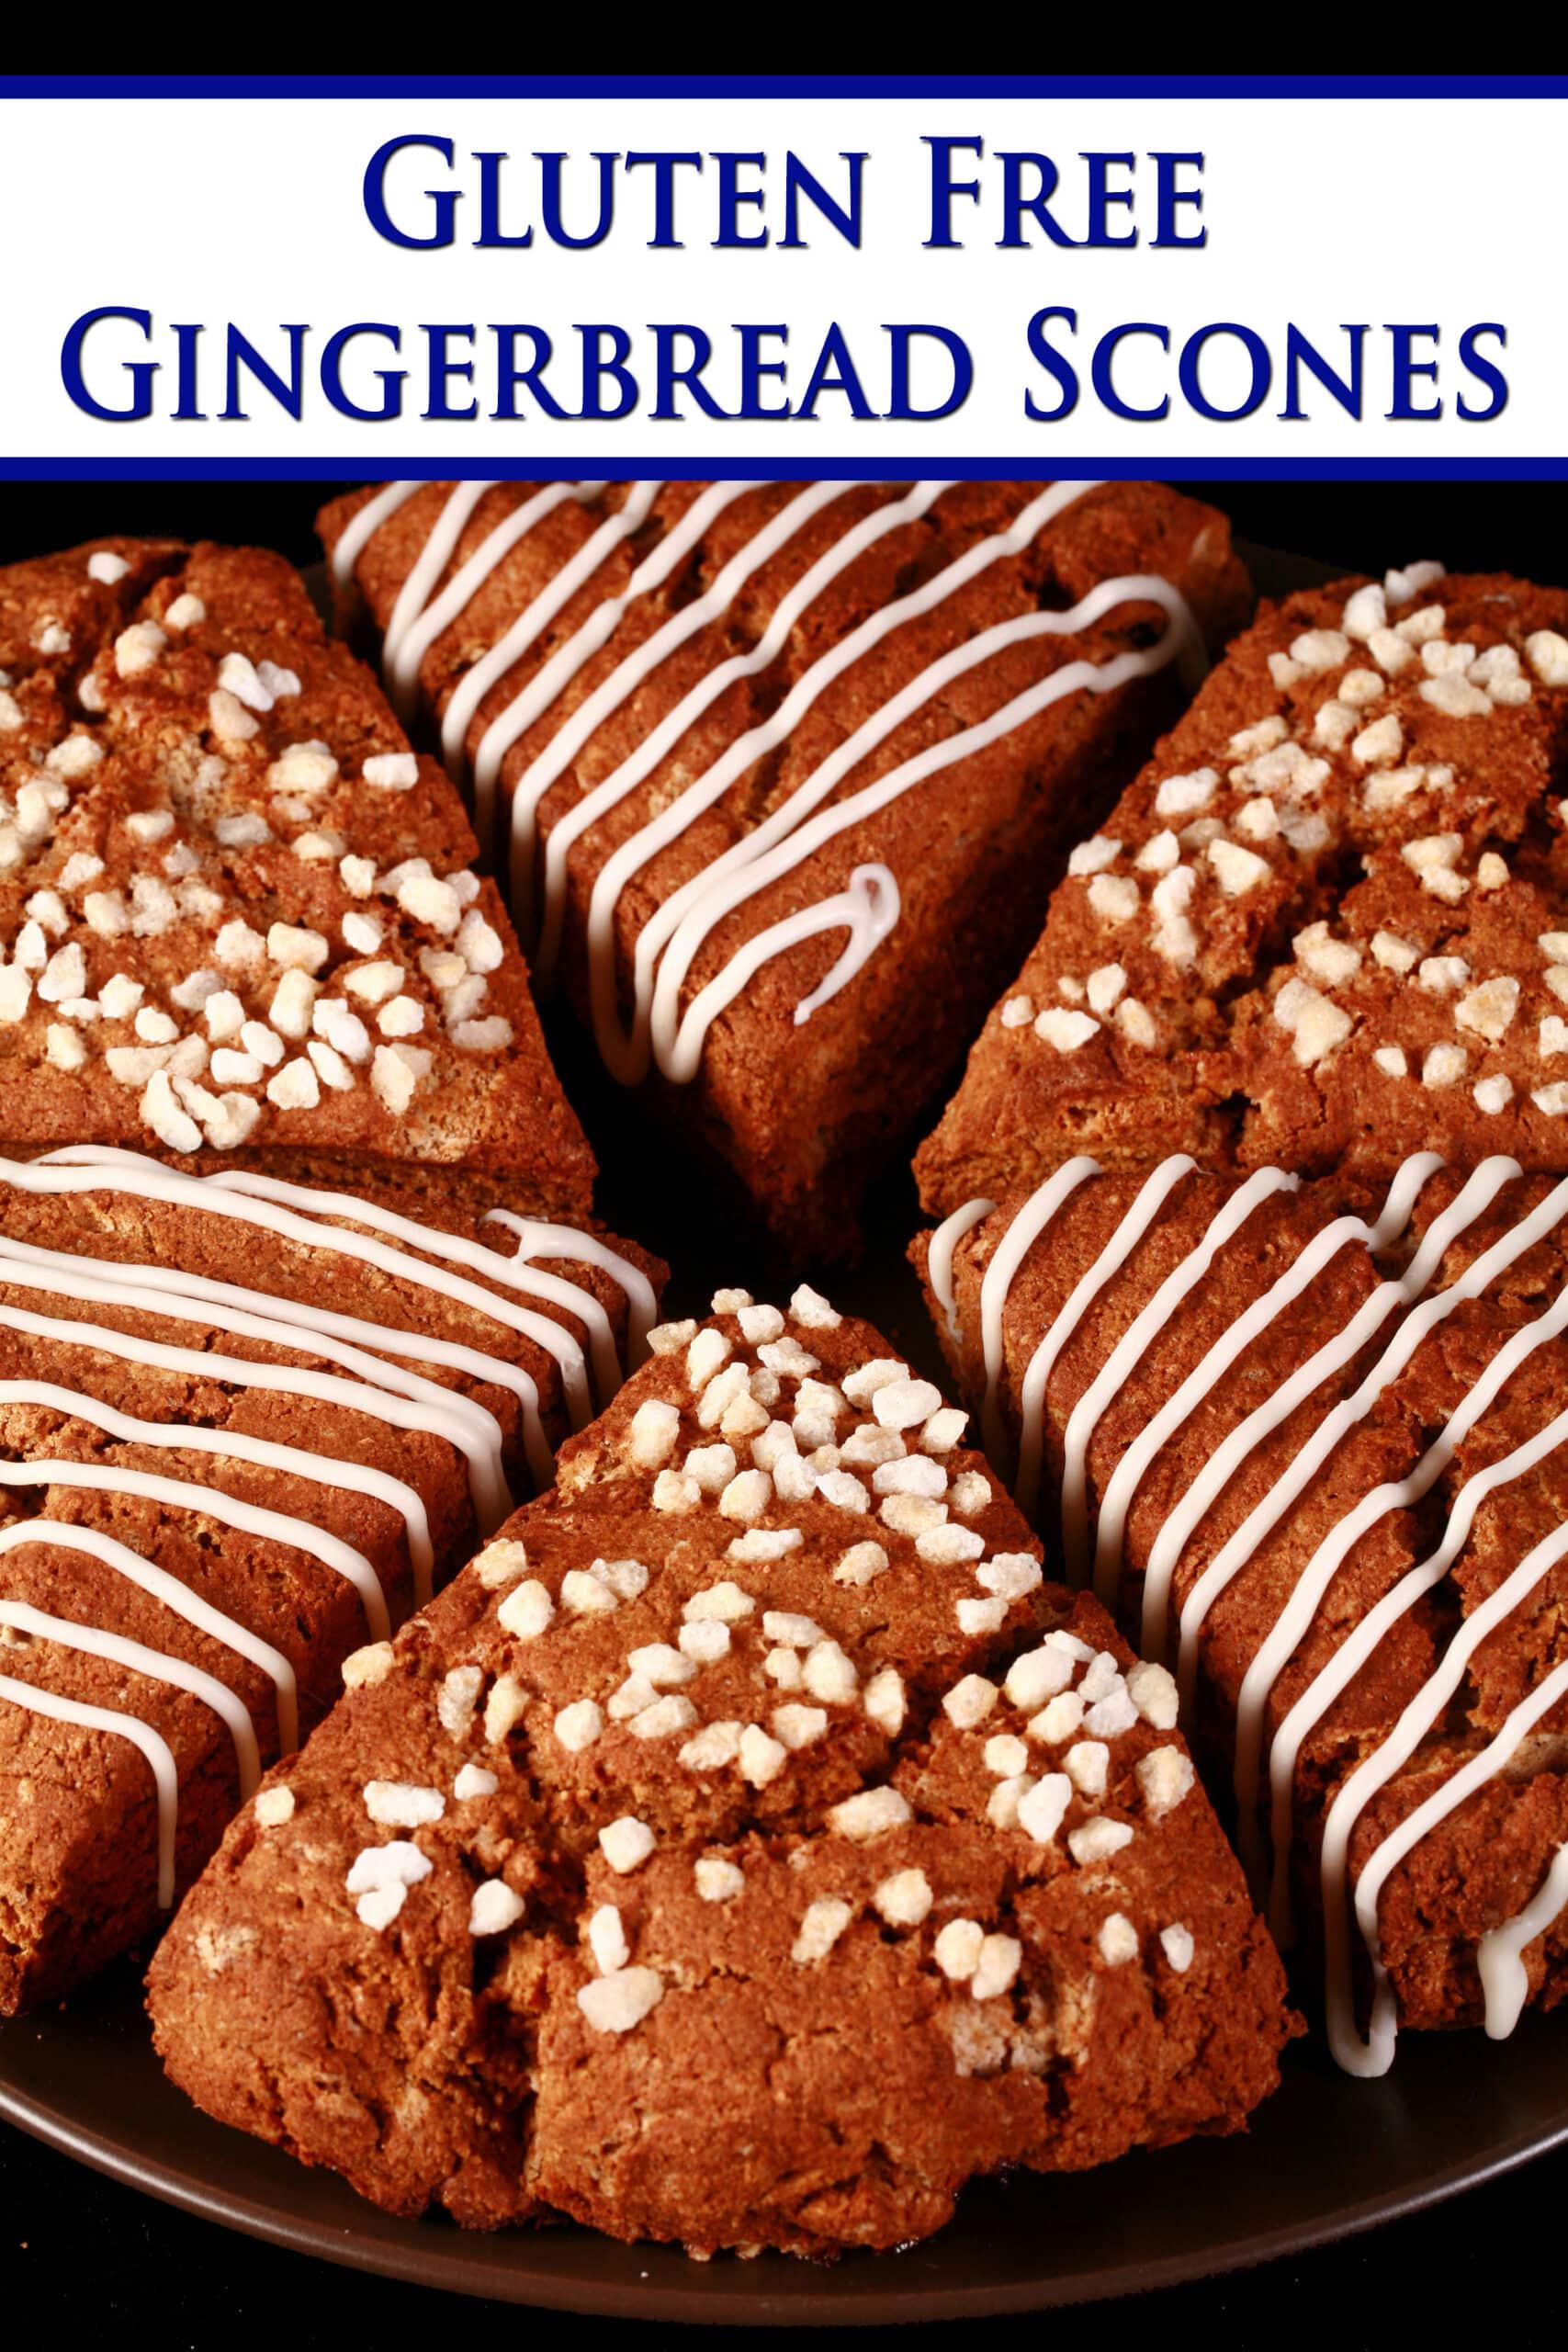 A plate of gluten-free gingerbread scones. Half have a sugar crust, the other half have a vanilla glaze drizzled over them. Overlaid text says gluten free gingerbread scones.